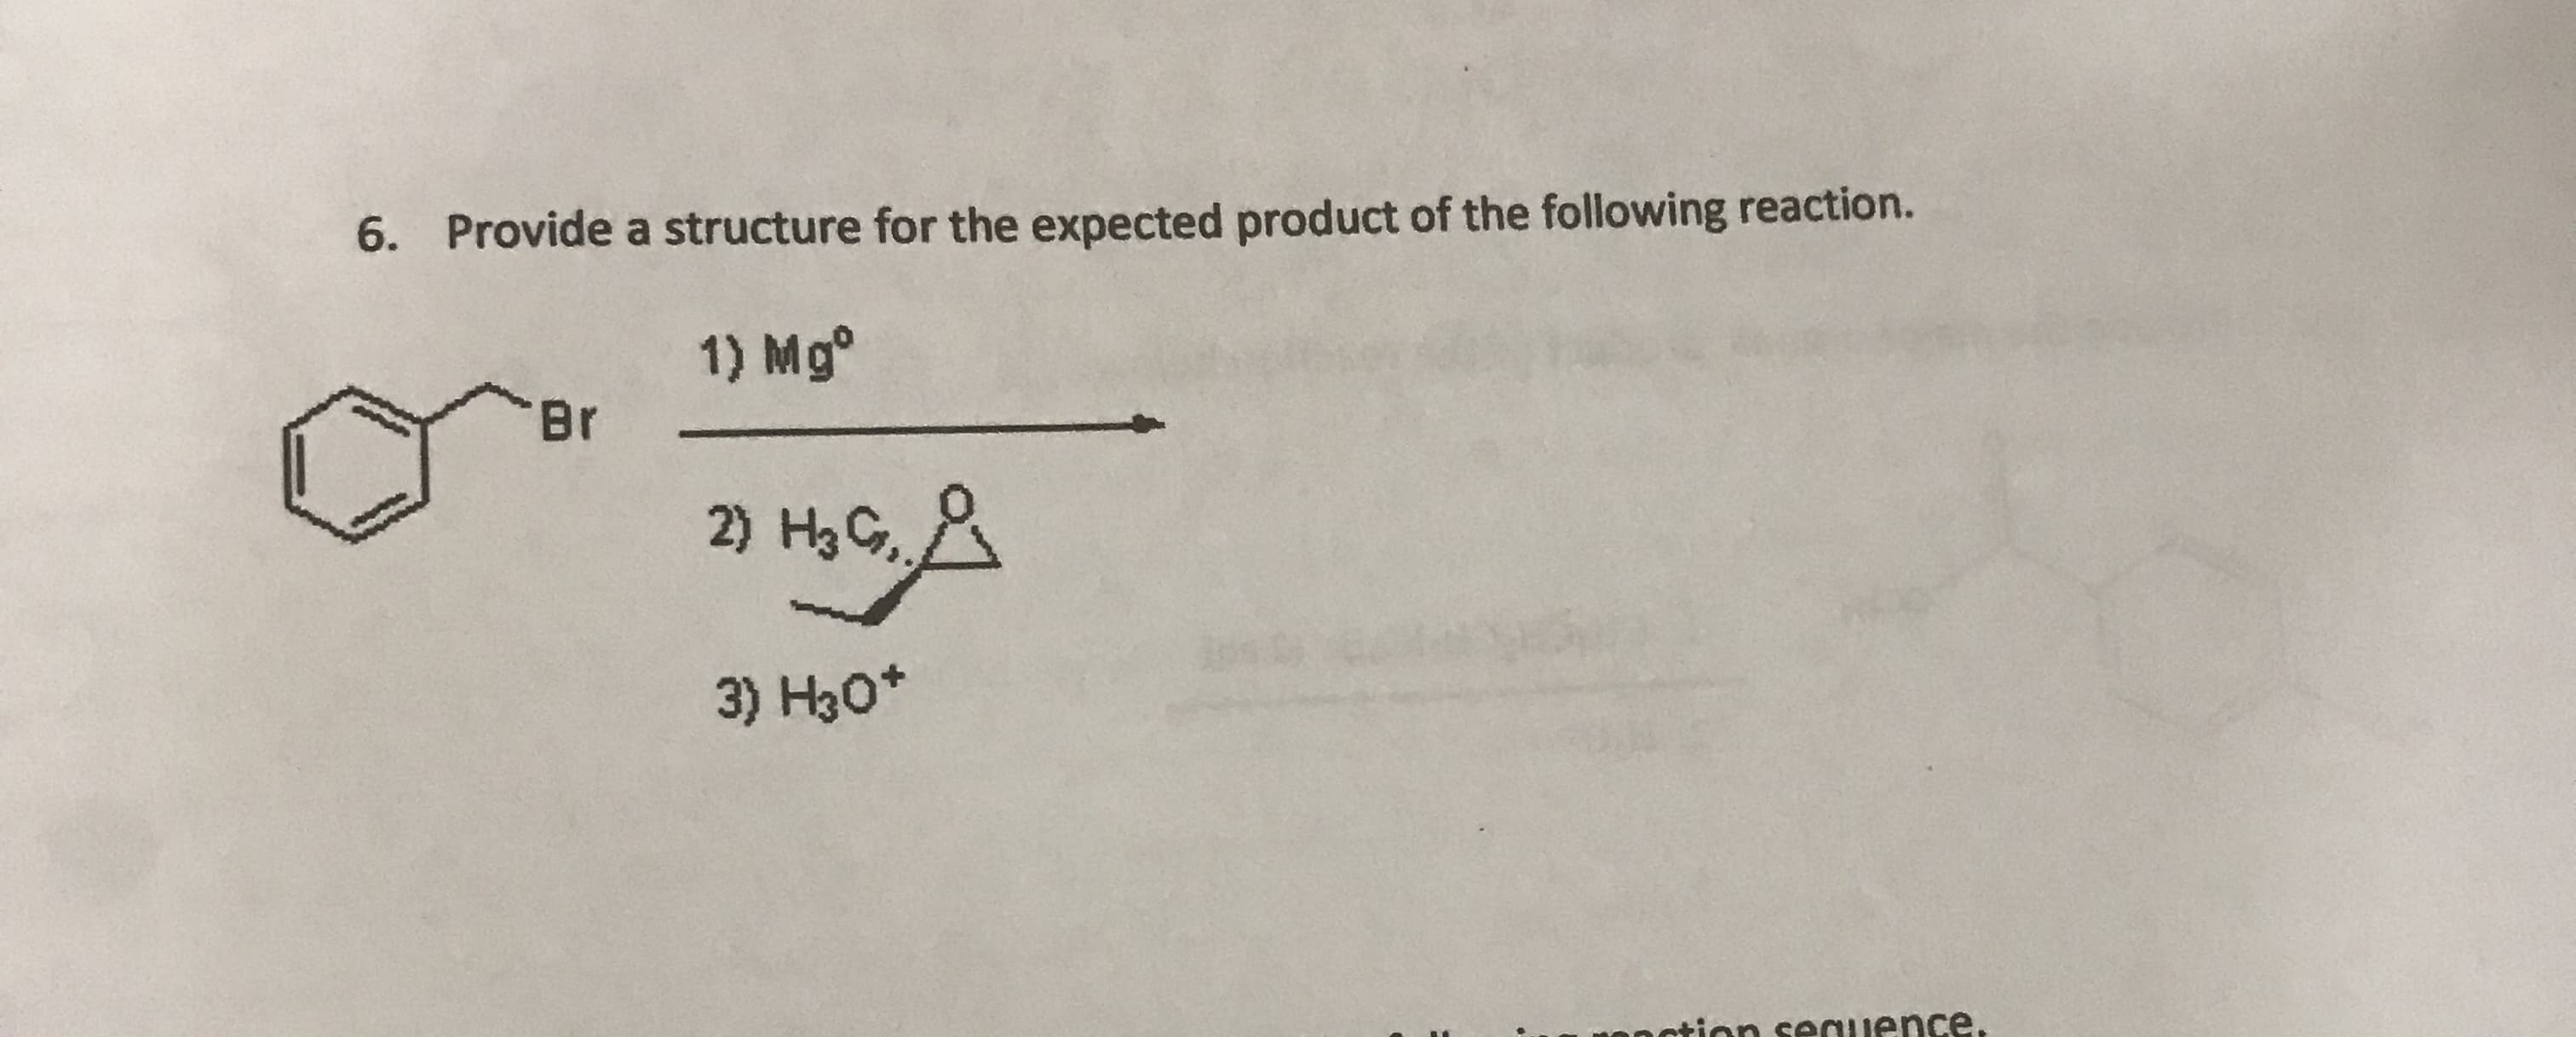 Provide a structure for the expected product of the following reaction.
6.
1) Mg
Br
2) H3 C
3) H30+
onction seruence.
